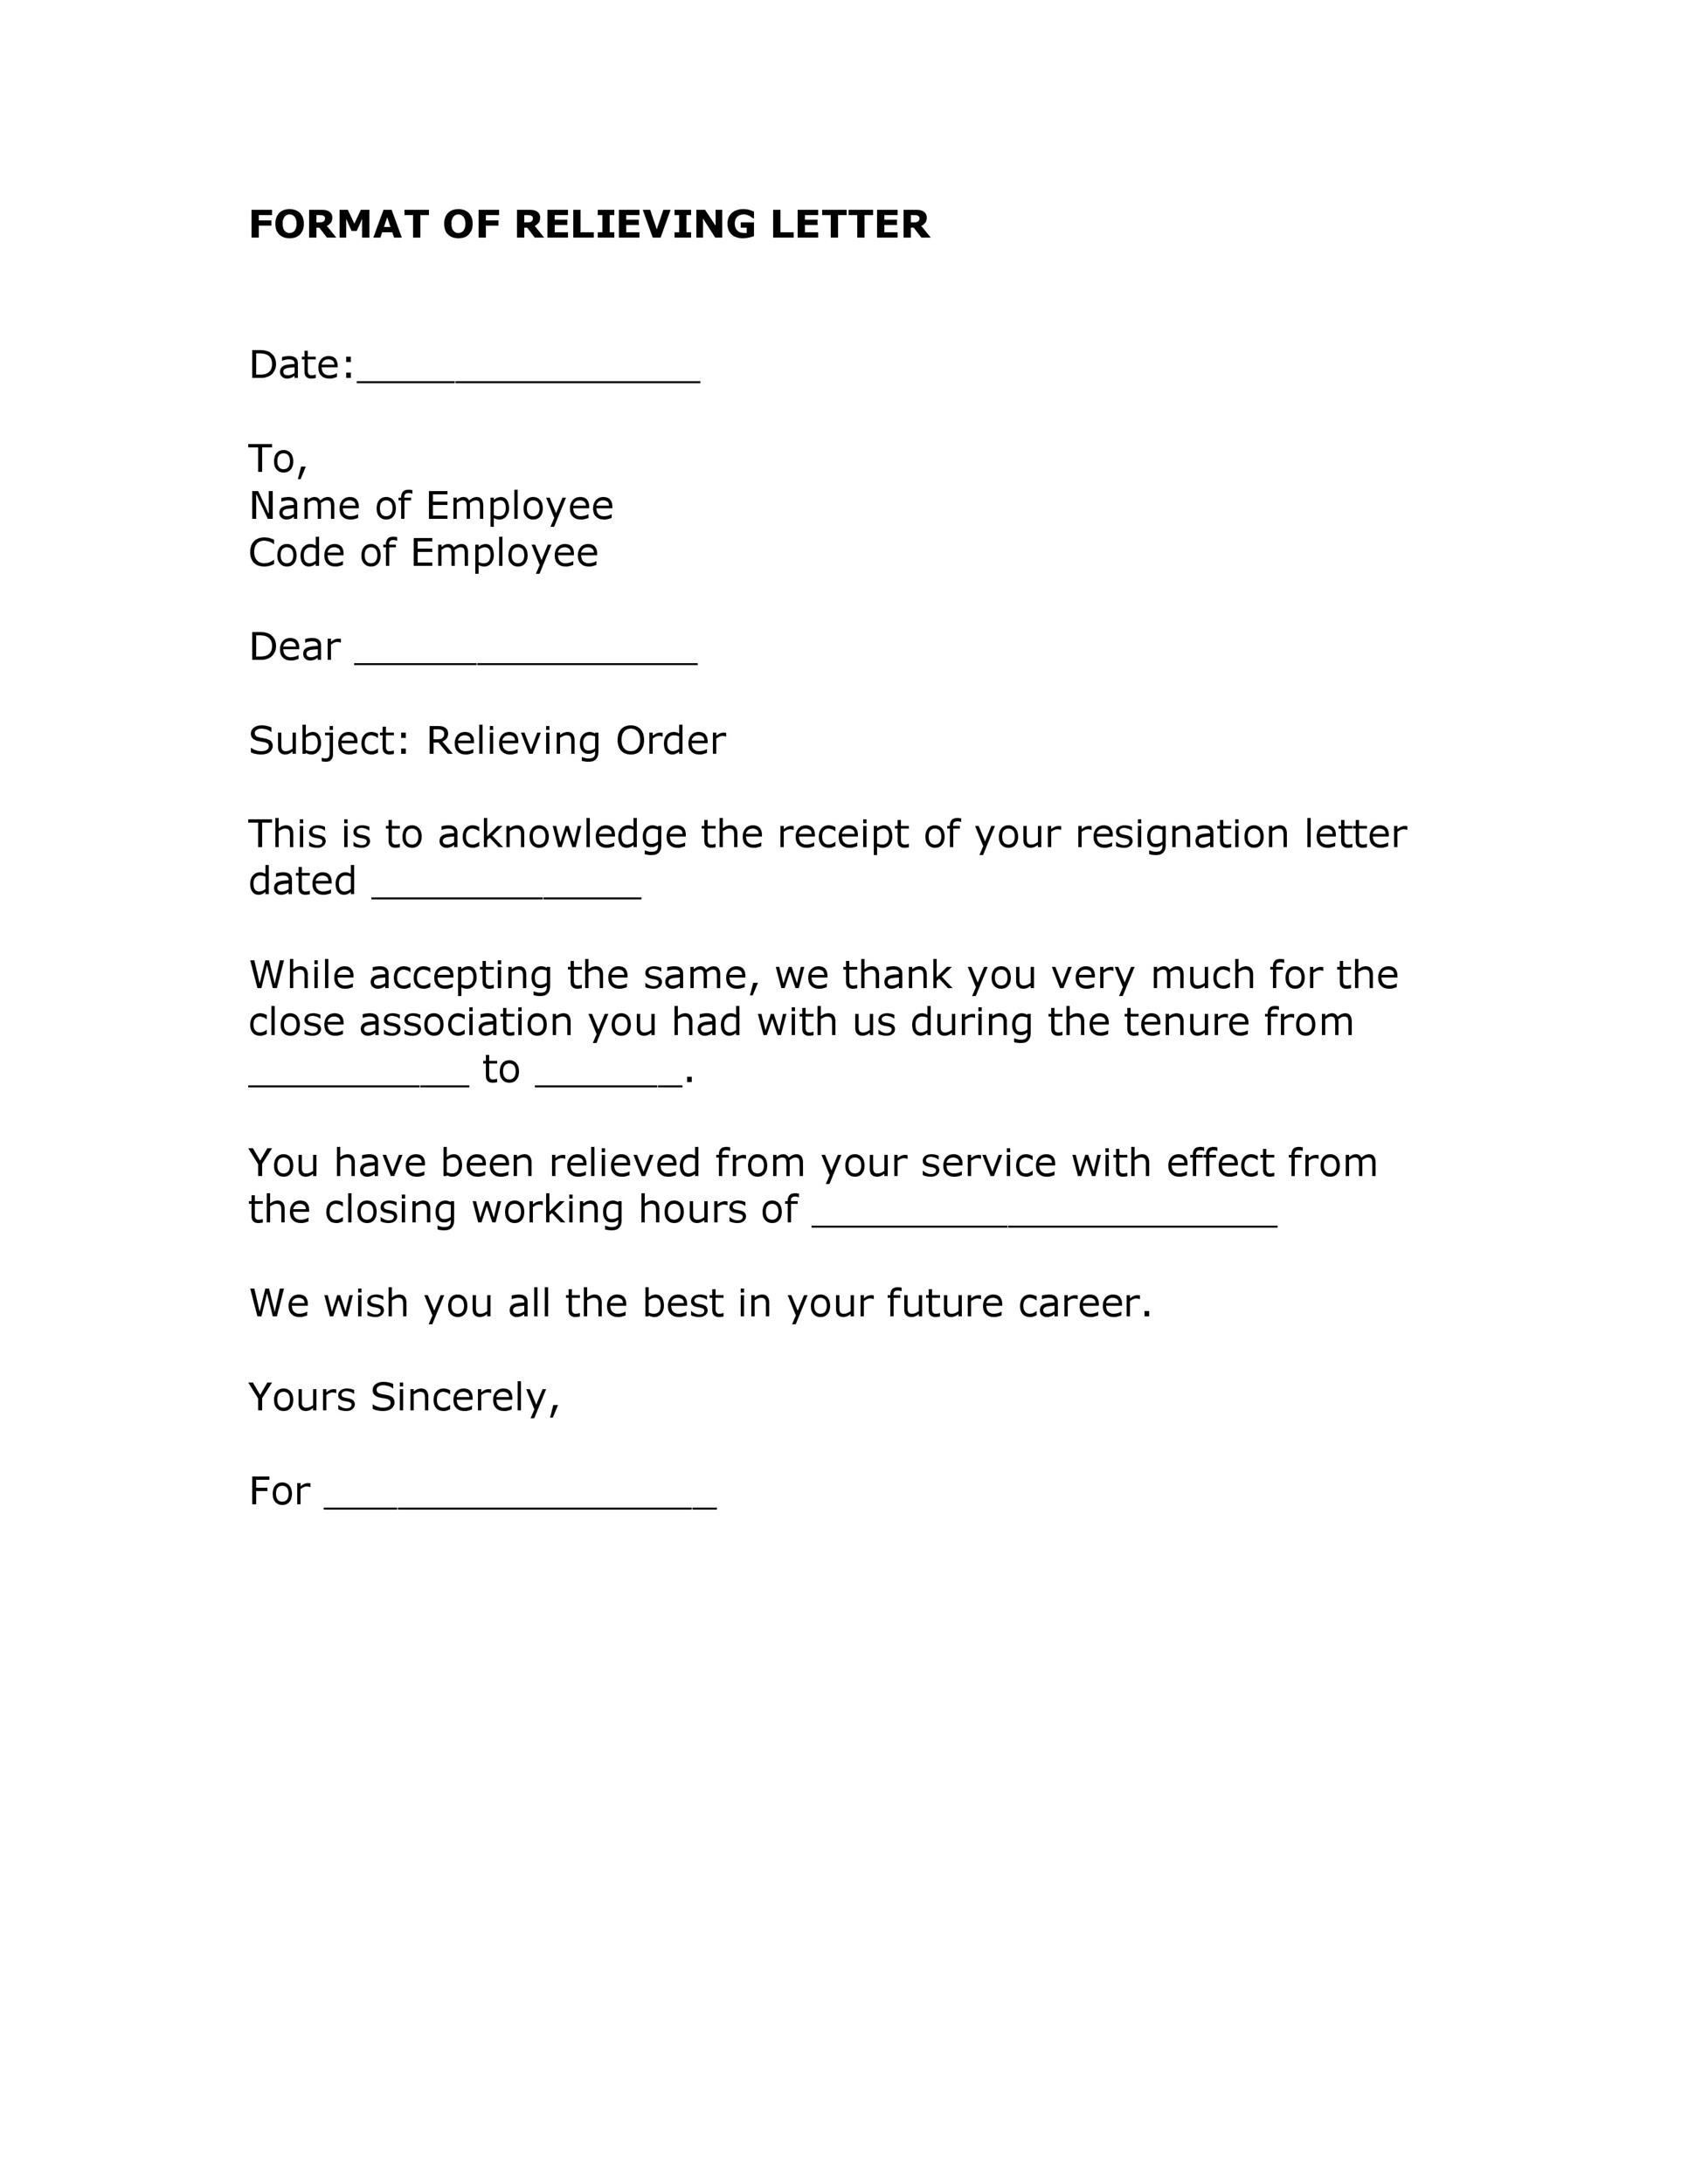 Free relieving letter 07